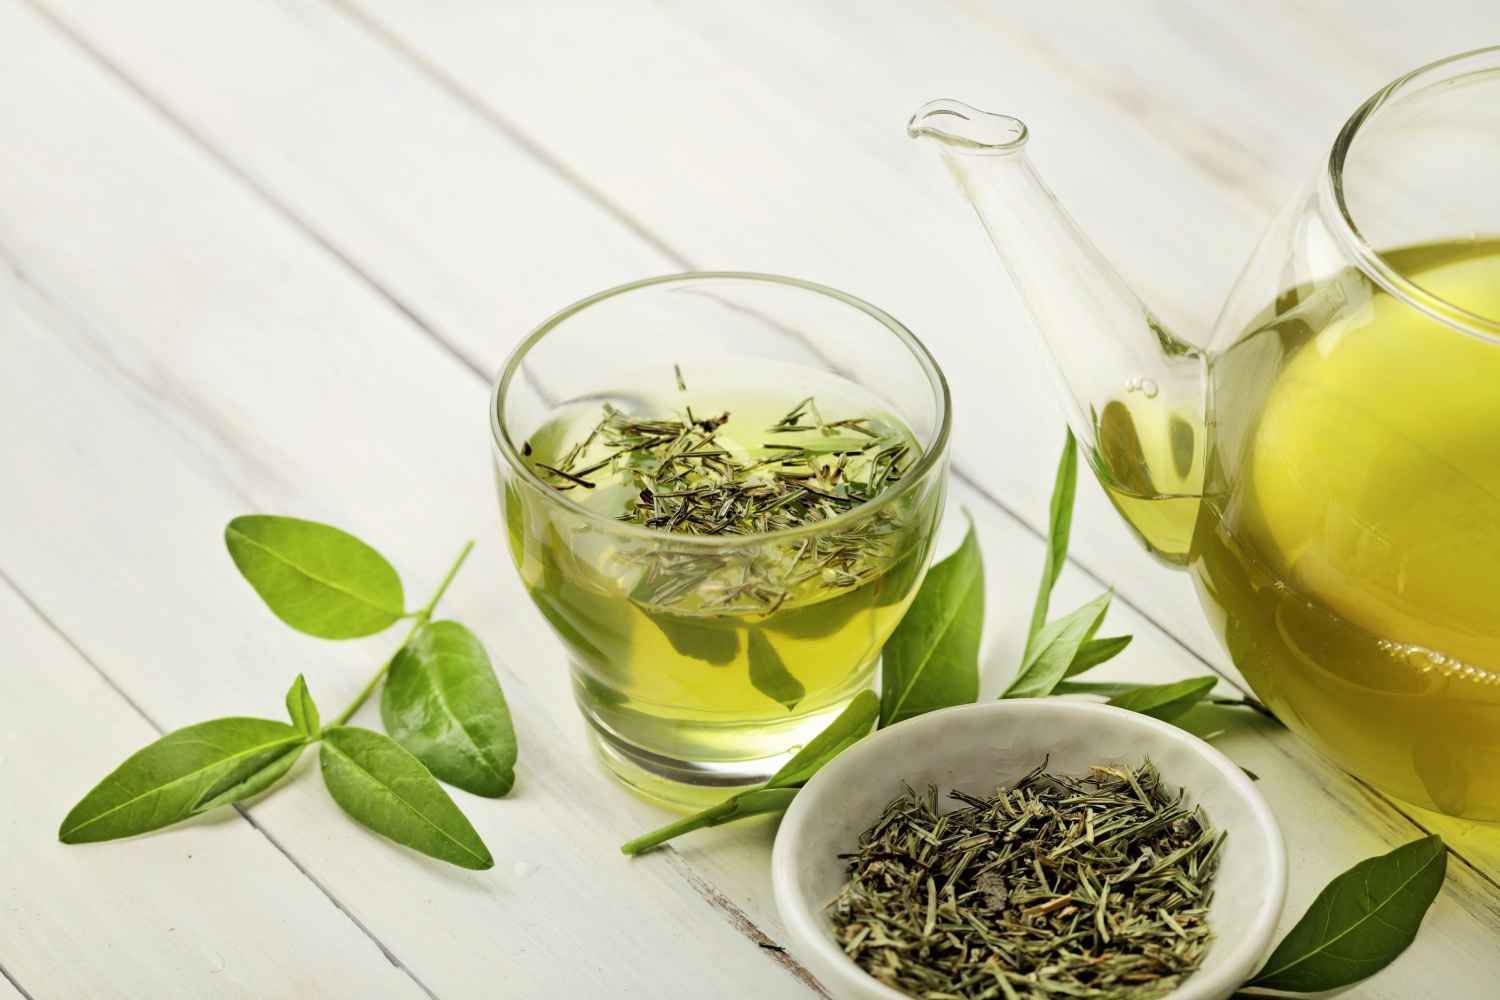 How much green tea is safe